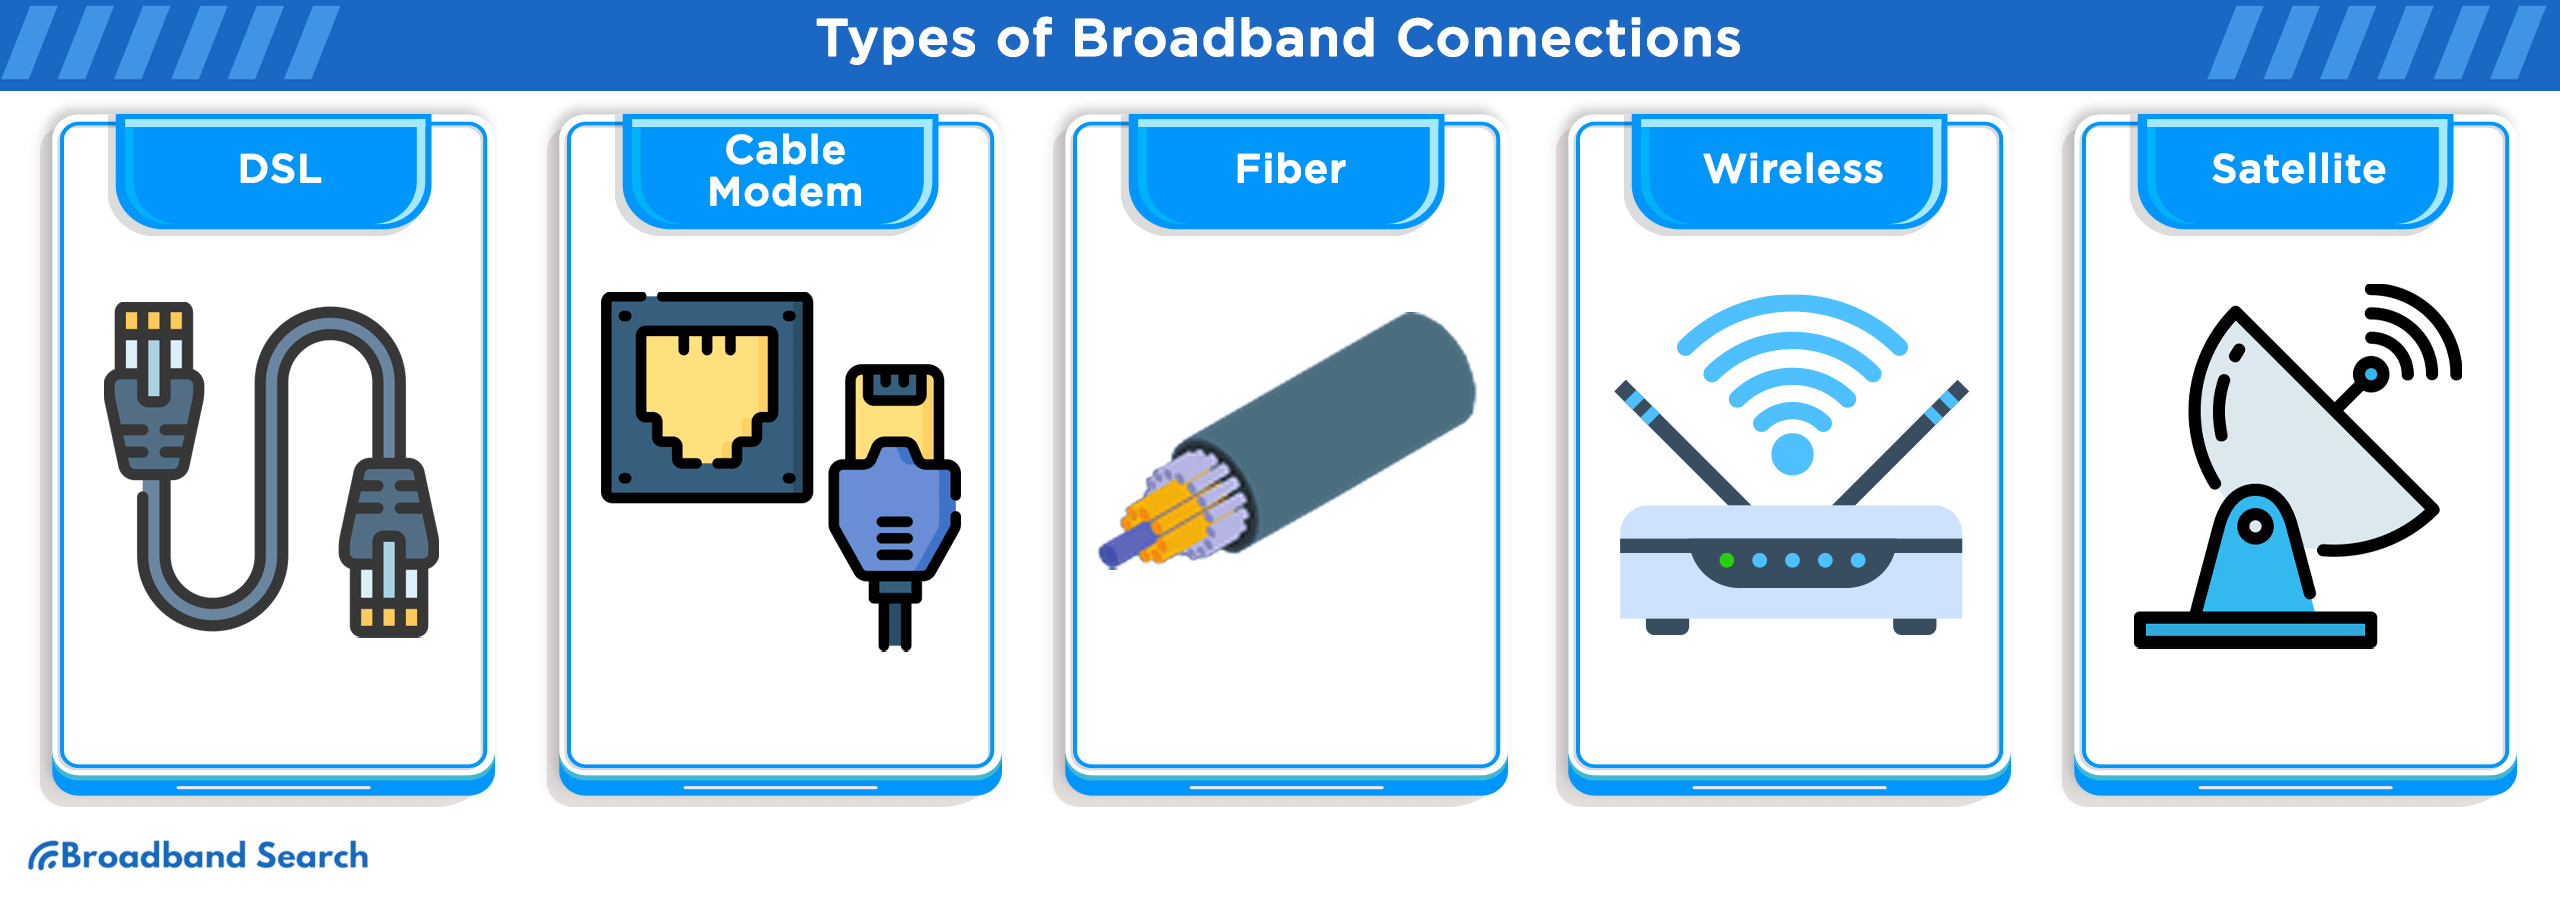 Types of Broadband Connections